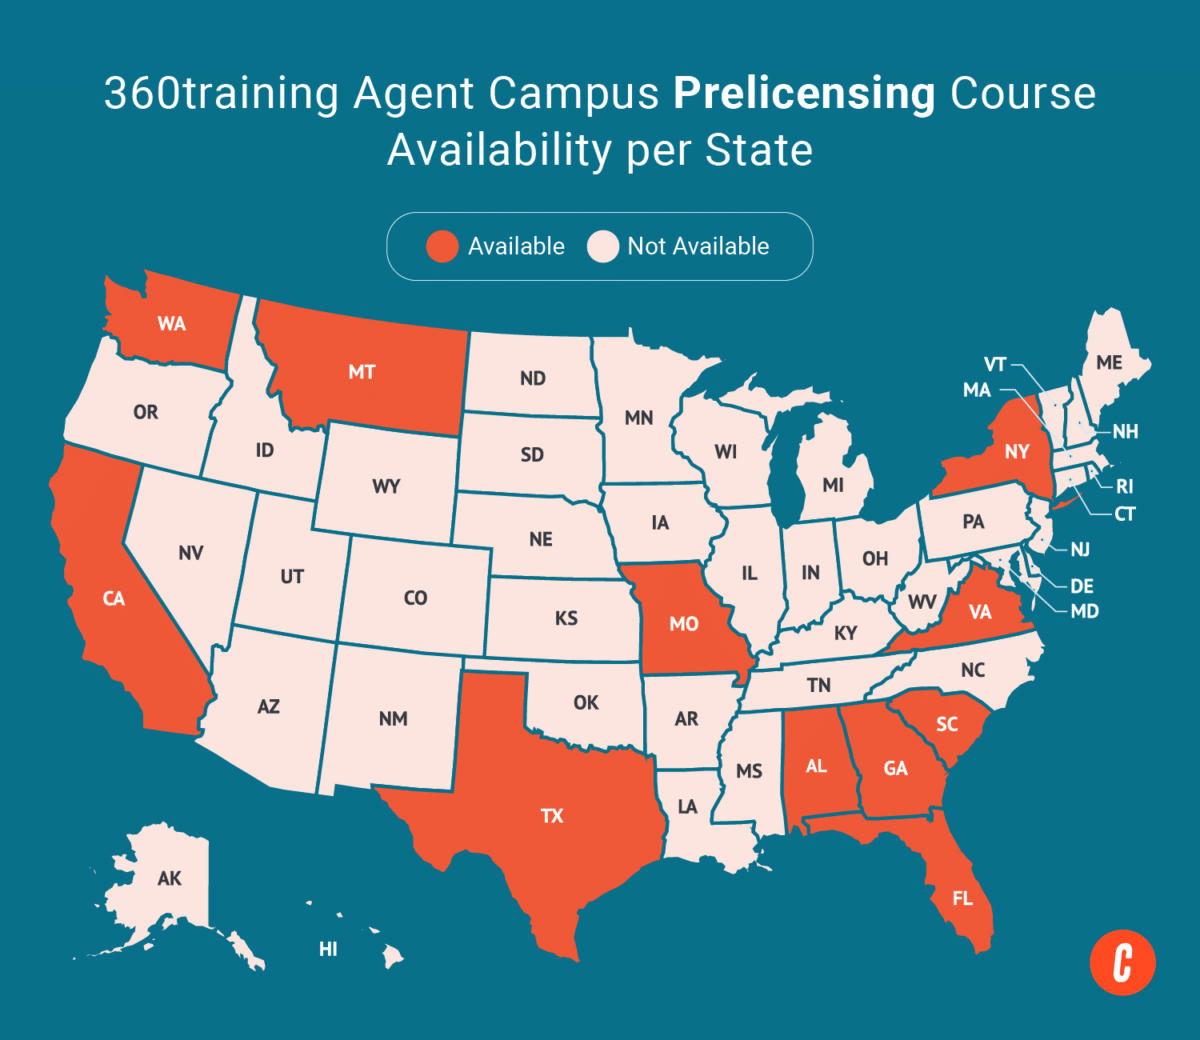 A U.S. map with states where 360training's available prelicensing courses are shaded